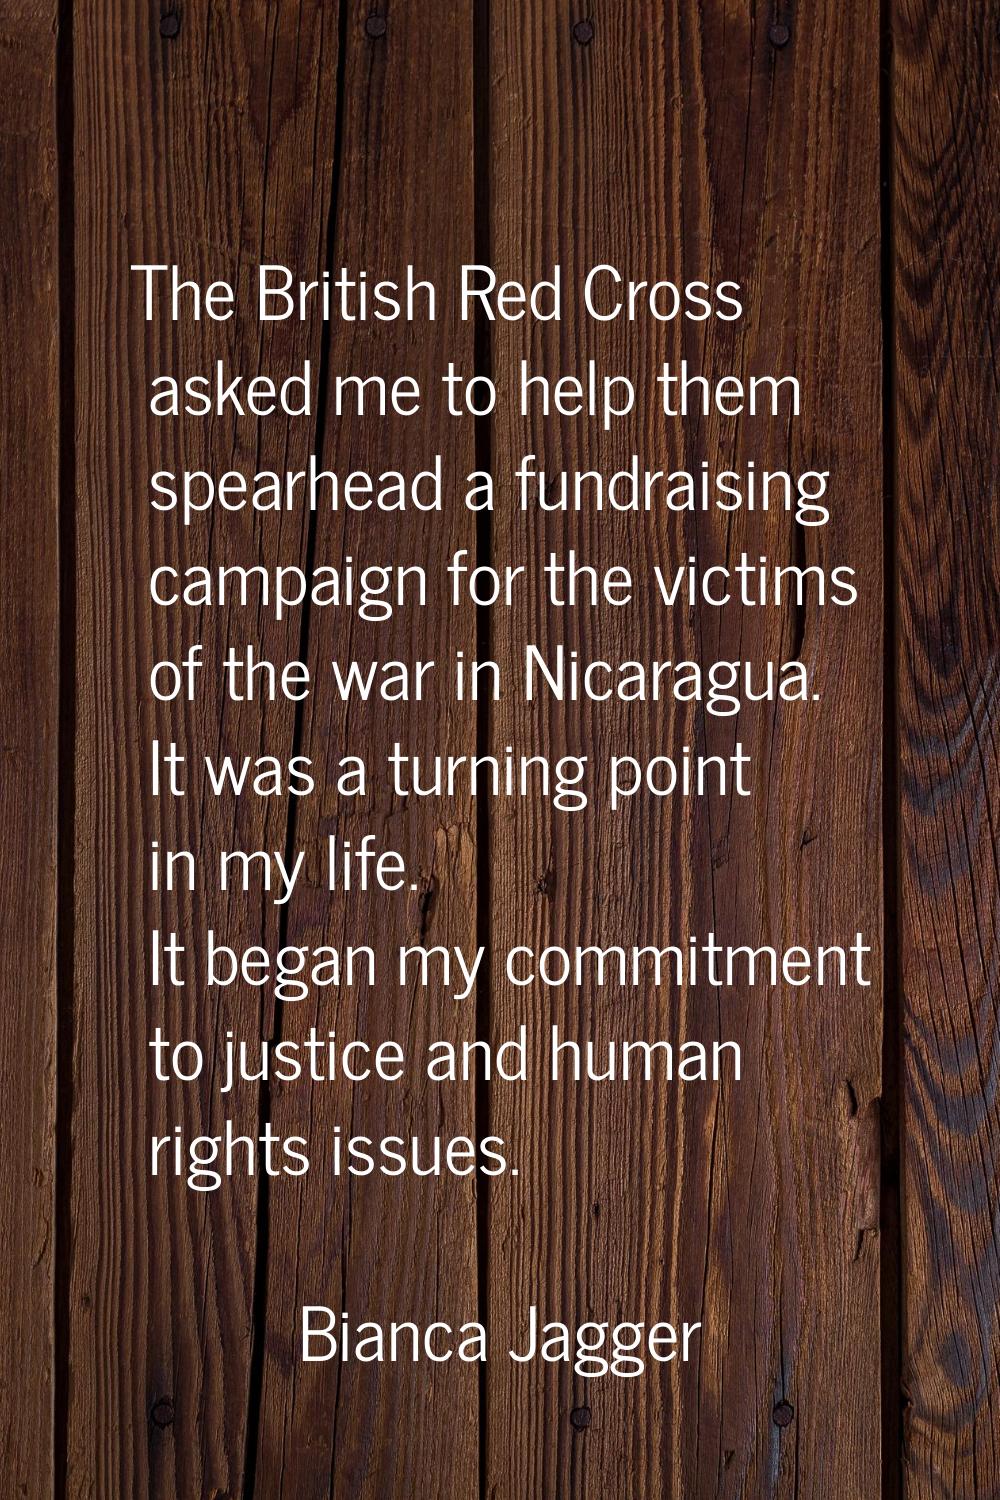 The British Red Cross asked me to help them spearhead a fundraising campaign for the victims of the